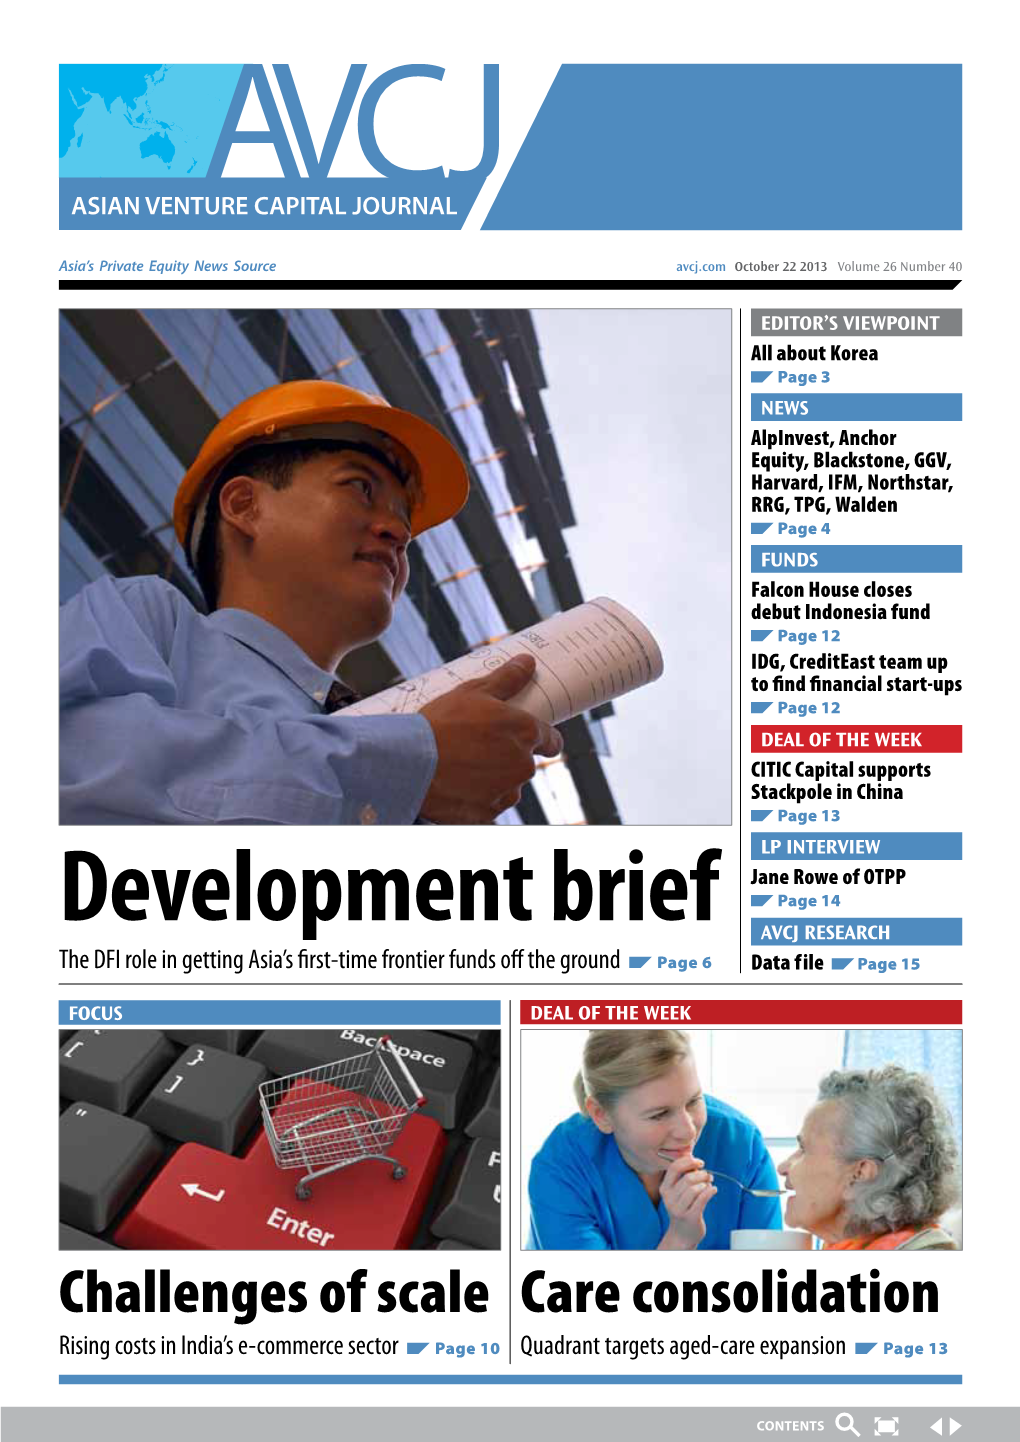 Development Brief AVCJ Research the DFI Role in Getting Asia’S First-Time Frontier Funds Off the Ground Page 6 Data F Ile Page 15